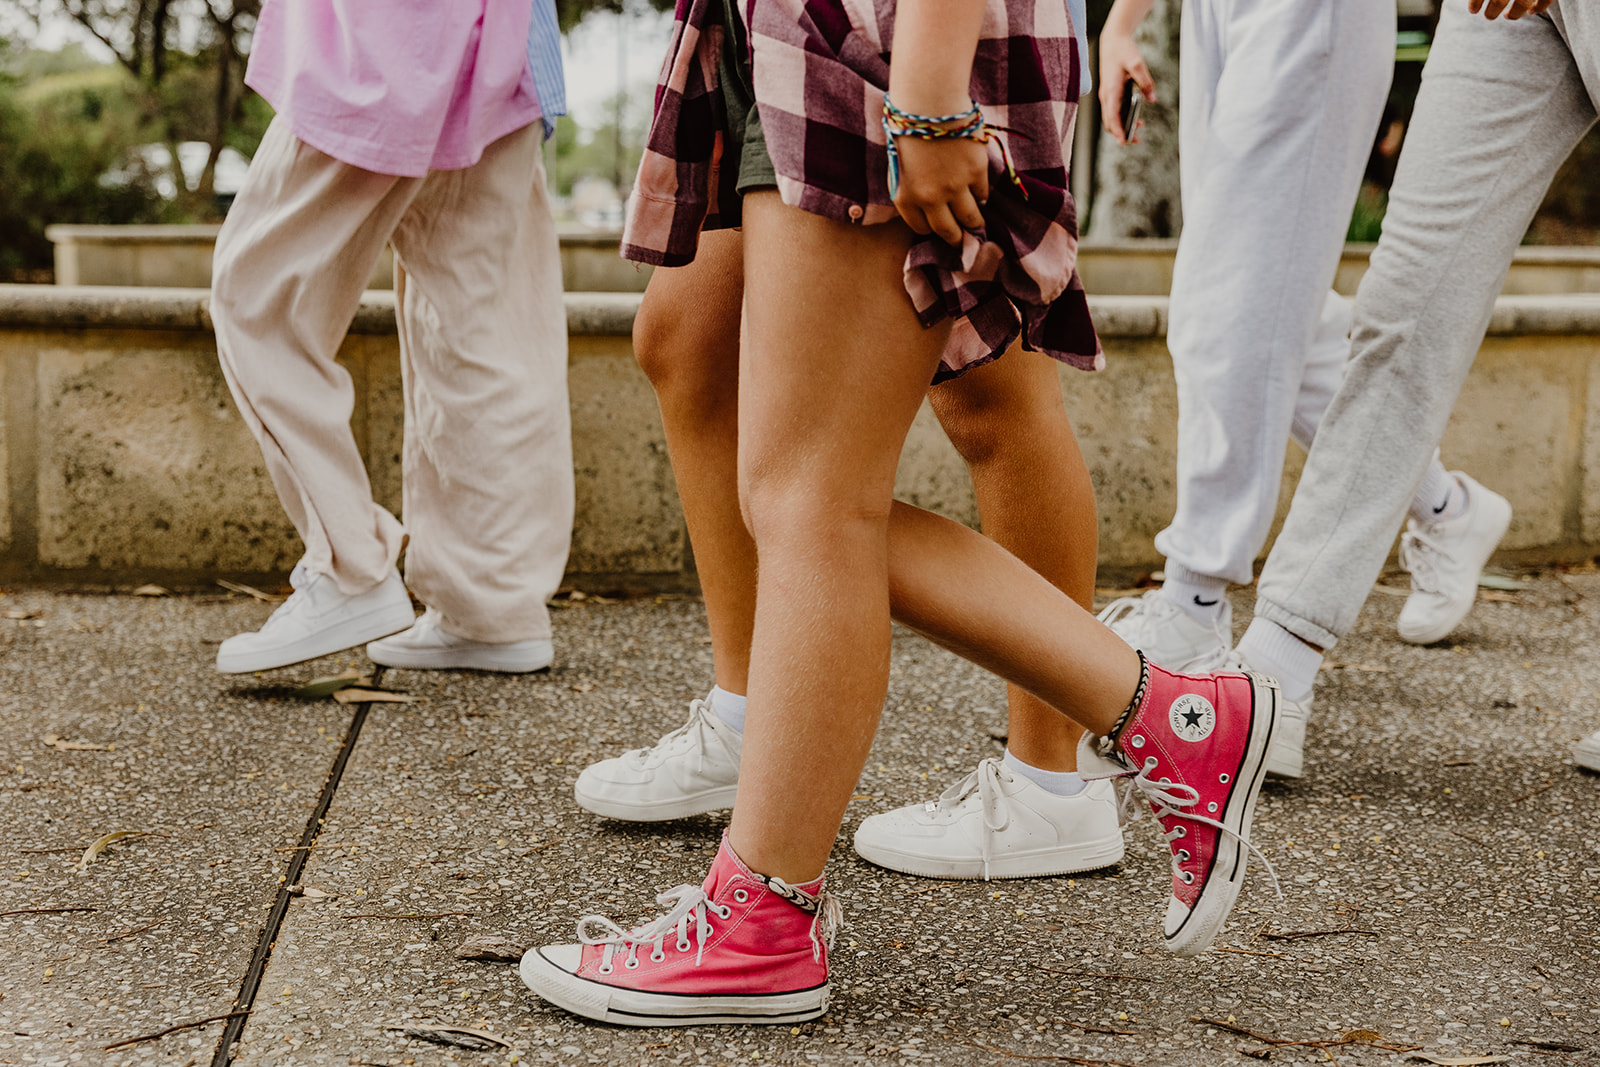 photograph of girls legs, from the waist down, walking to the left of the photograph. From left to right the girls are wearing: girl 1: pink and blue oversized shirt, cream coloured wide-leg pants and white sneakers, girl 2: olive green shorts, pink and maroon checked shirt tied around her waist, hot pink coloured Converse sneakers, and she has friendship bracelets around her left wrist, and one on each ankle, girl 3: light blue jumper, denim shorts and white sneakers, girl 4 and 5: light grey tracksuit pants and white sneakers.